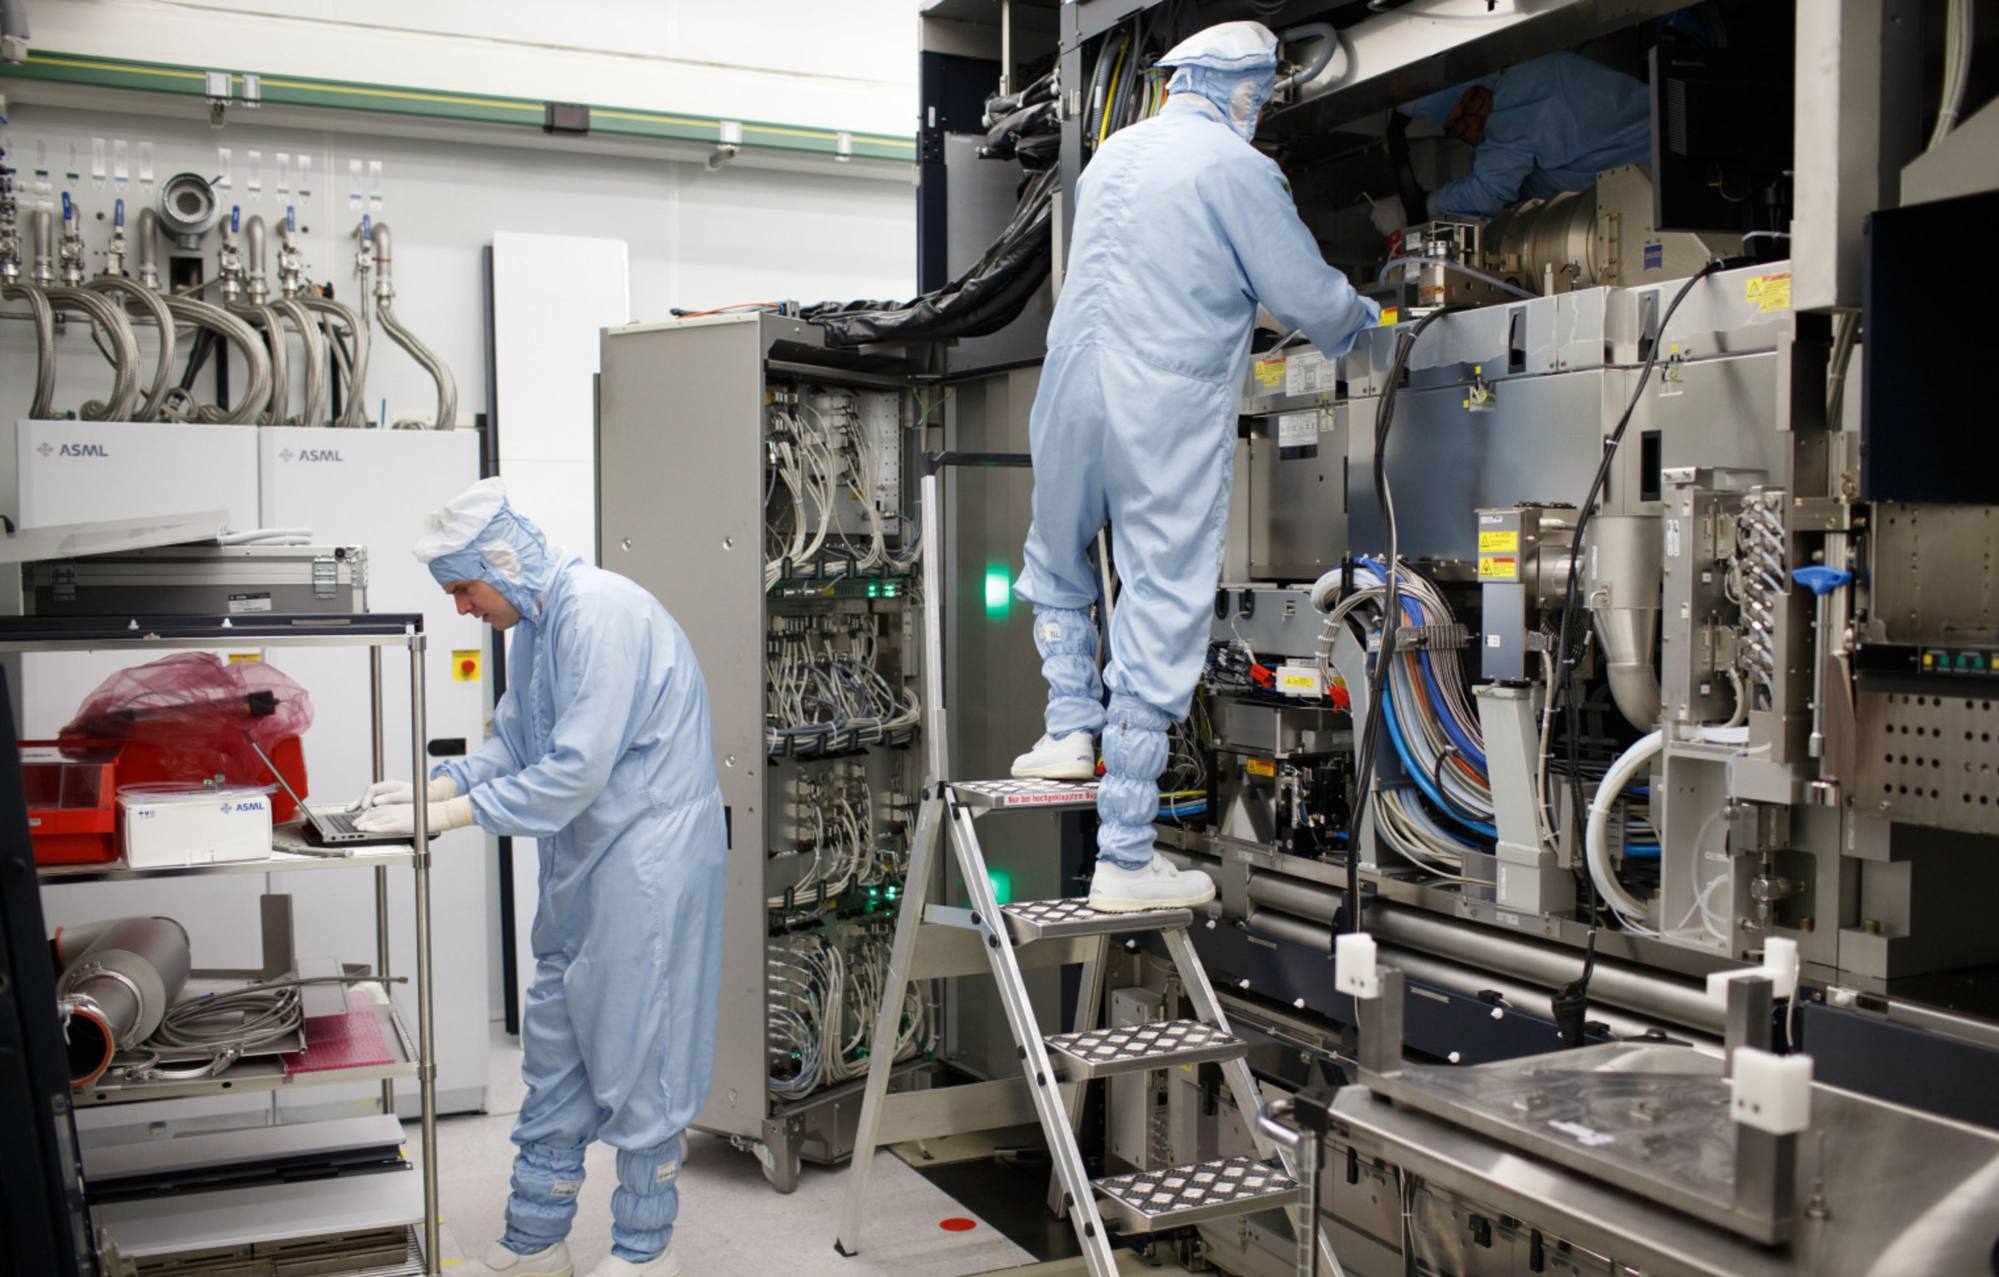 Employees work at an ASML Holding NV factory in Veldhoven, Netherlands. ASML is Europe’s largest supplier of semiconductor production equipment. Photo: Bloomberg